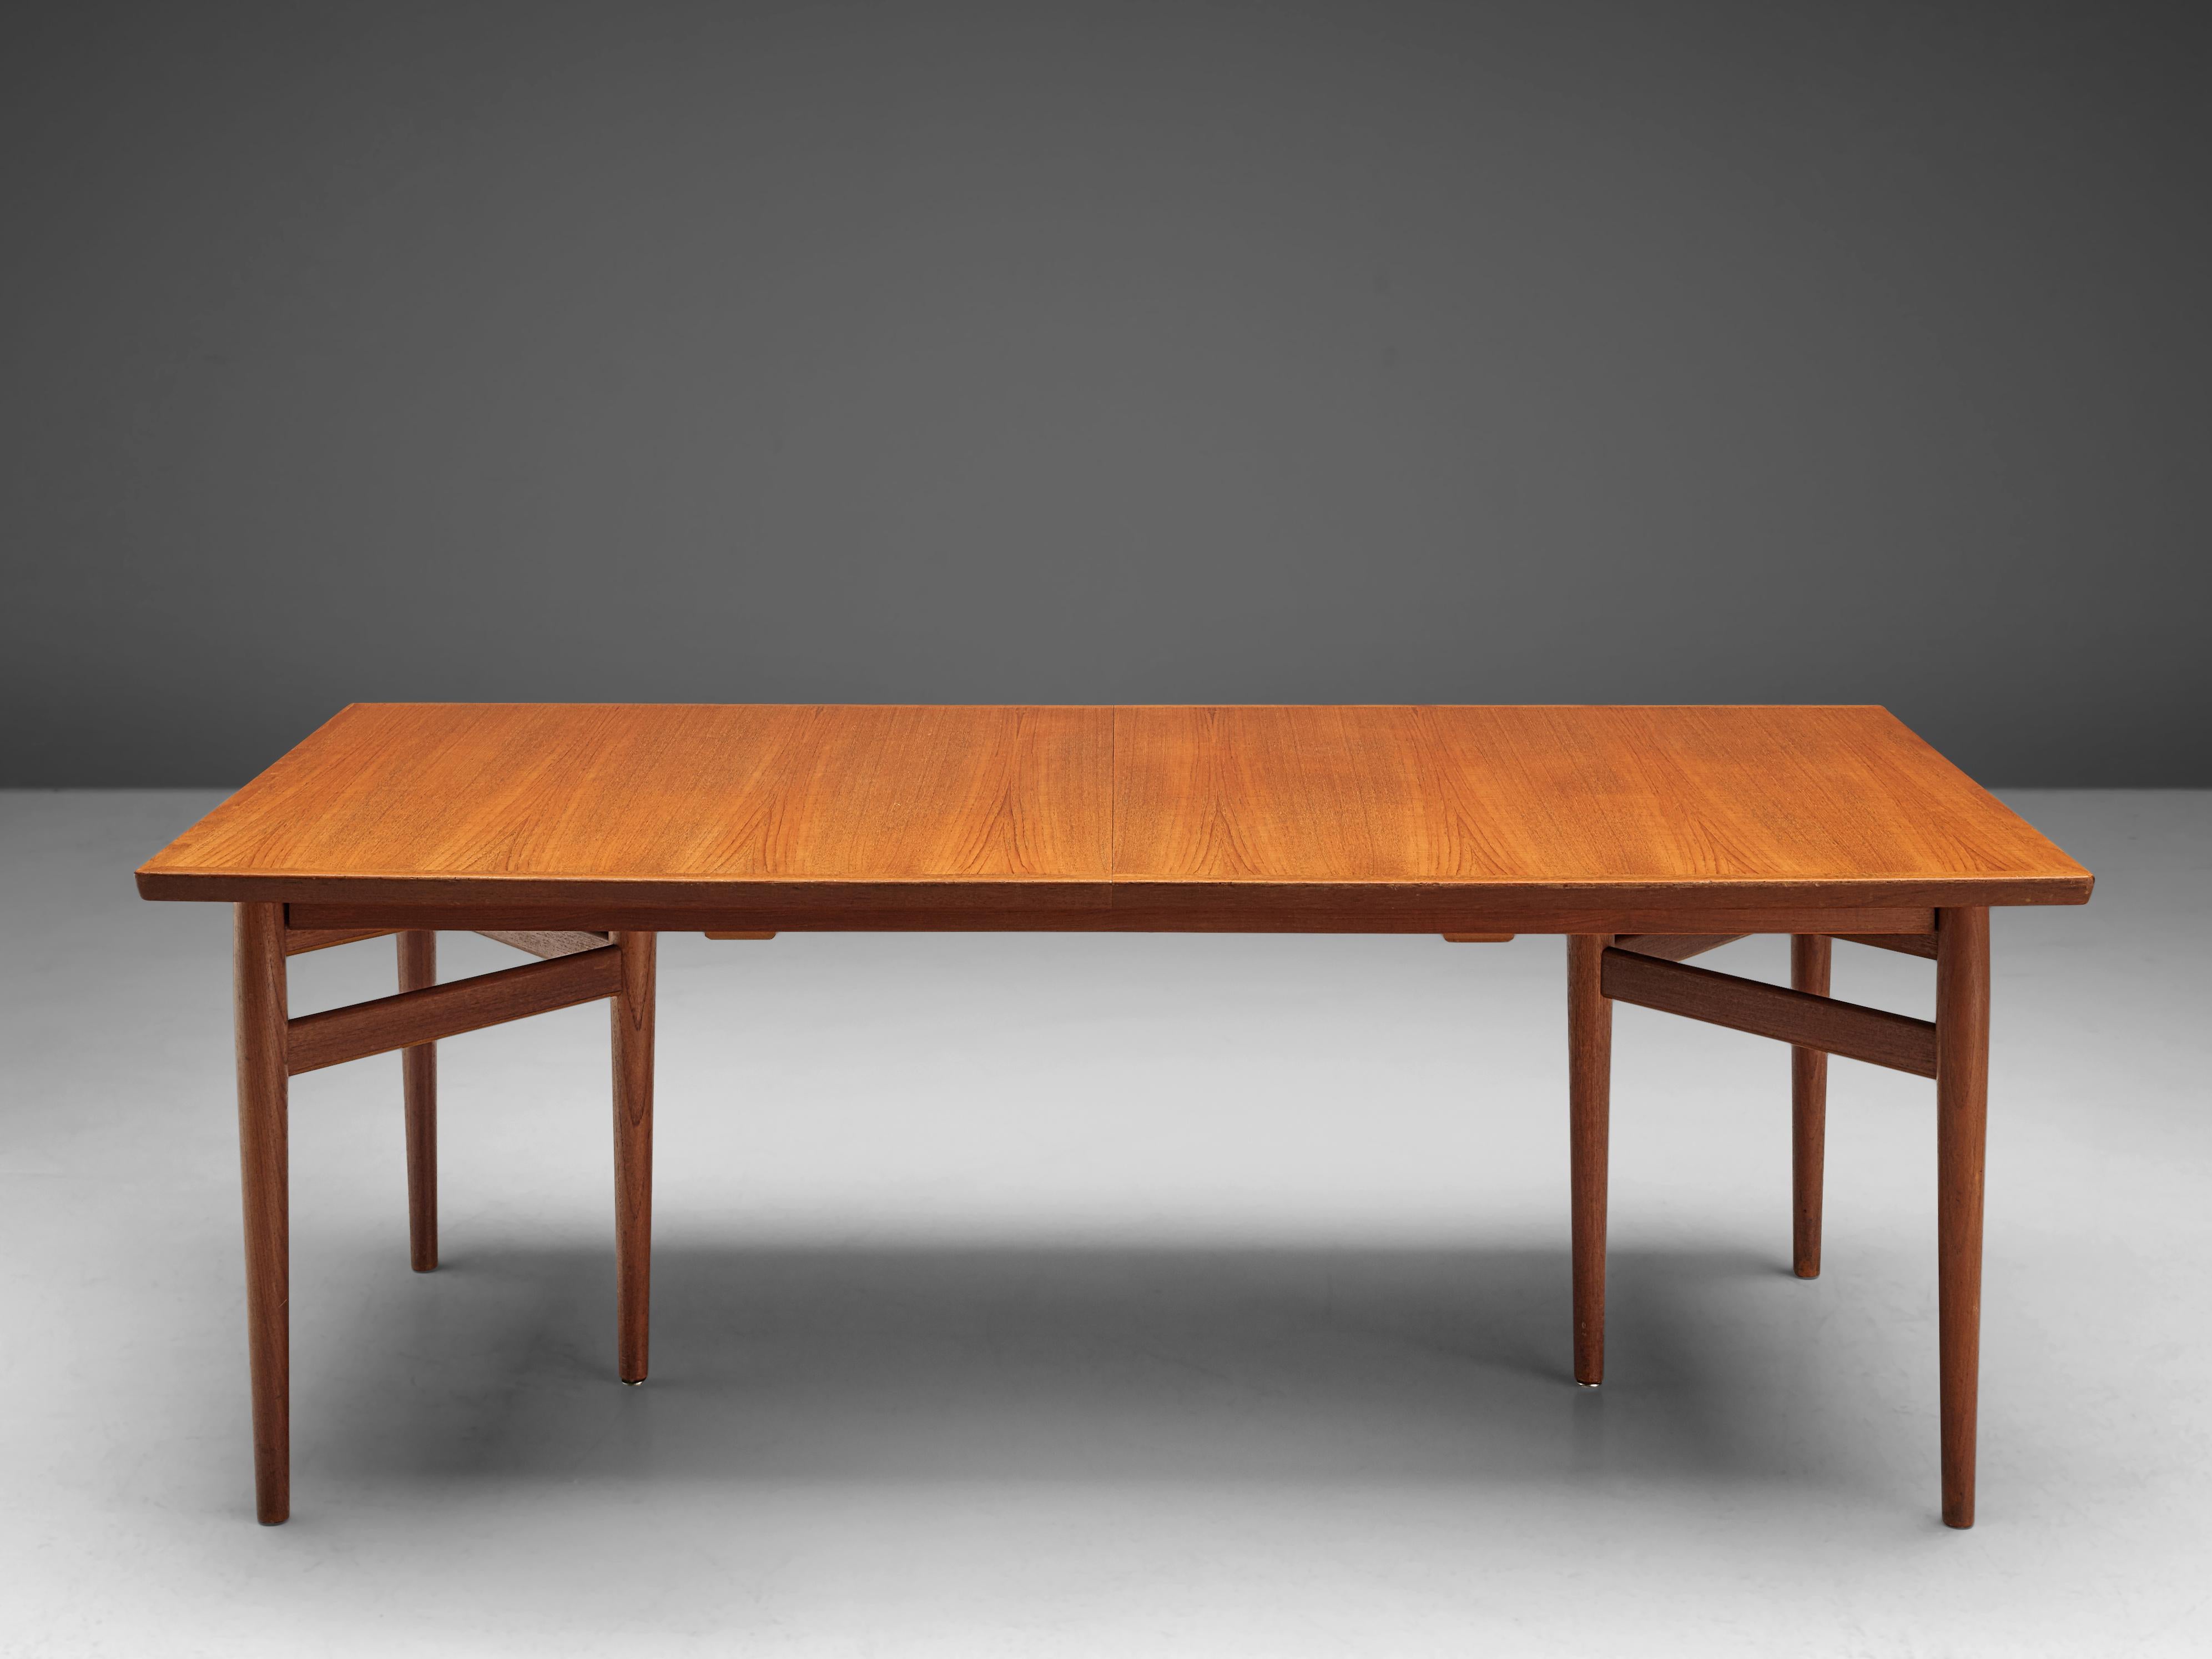 Arne Vodder for Sibast, dining room/conference table, teak, Denmark, 1960s.  

This large dining room- or conference table by Arne Vodder is a true example of the combination of slender and organic design with rounded colors and excellent material